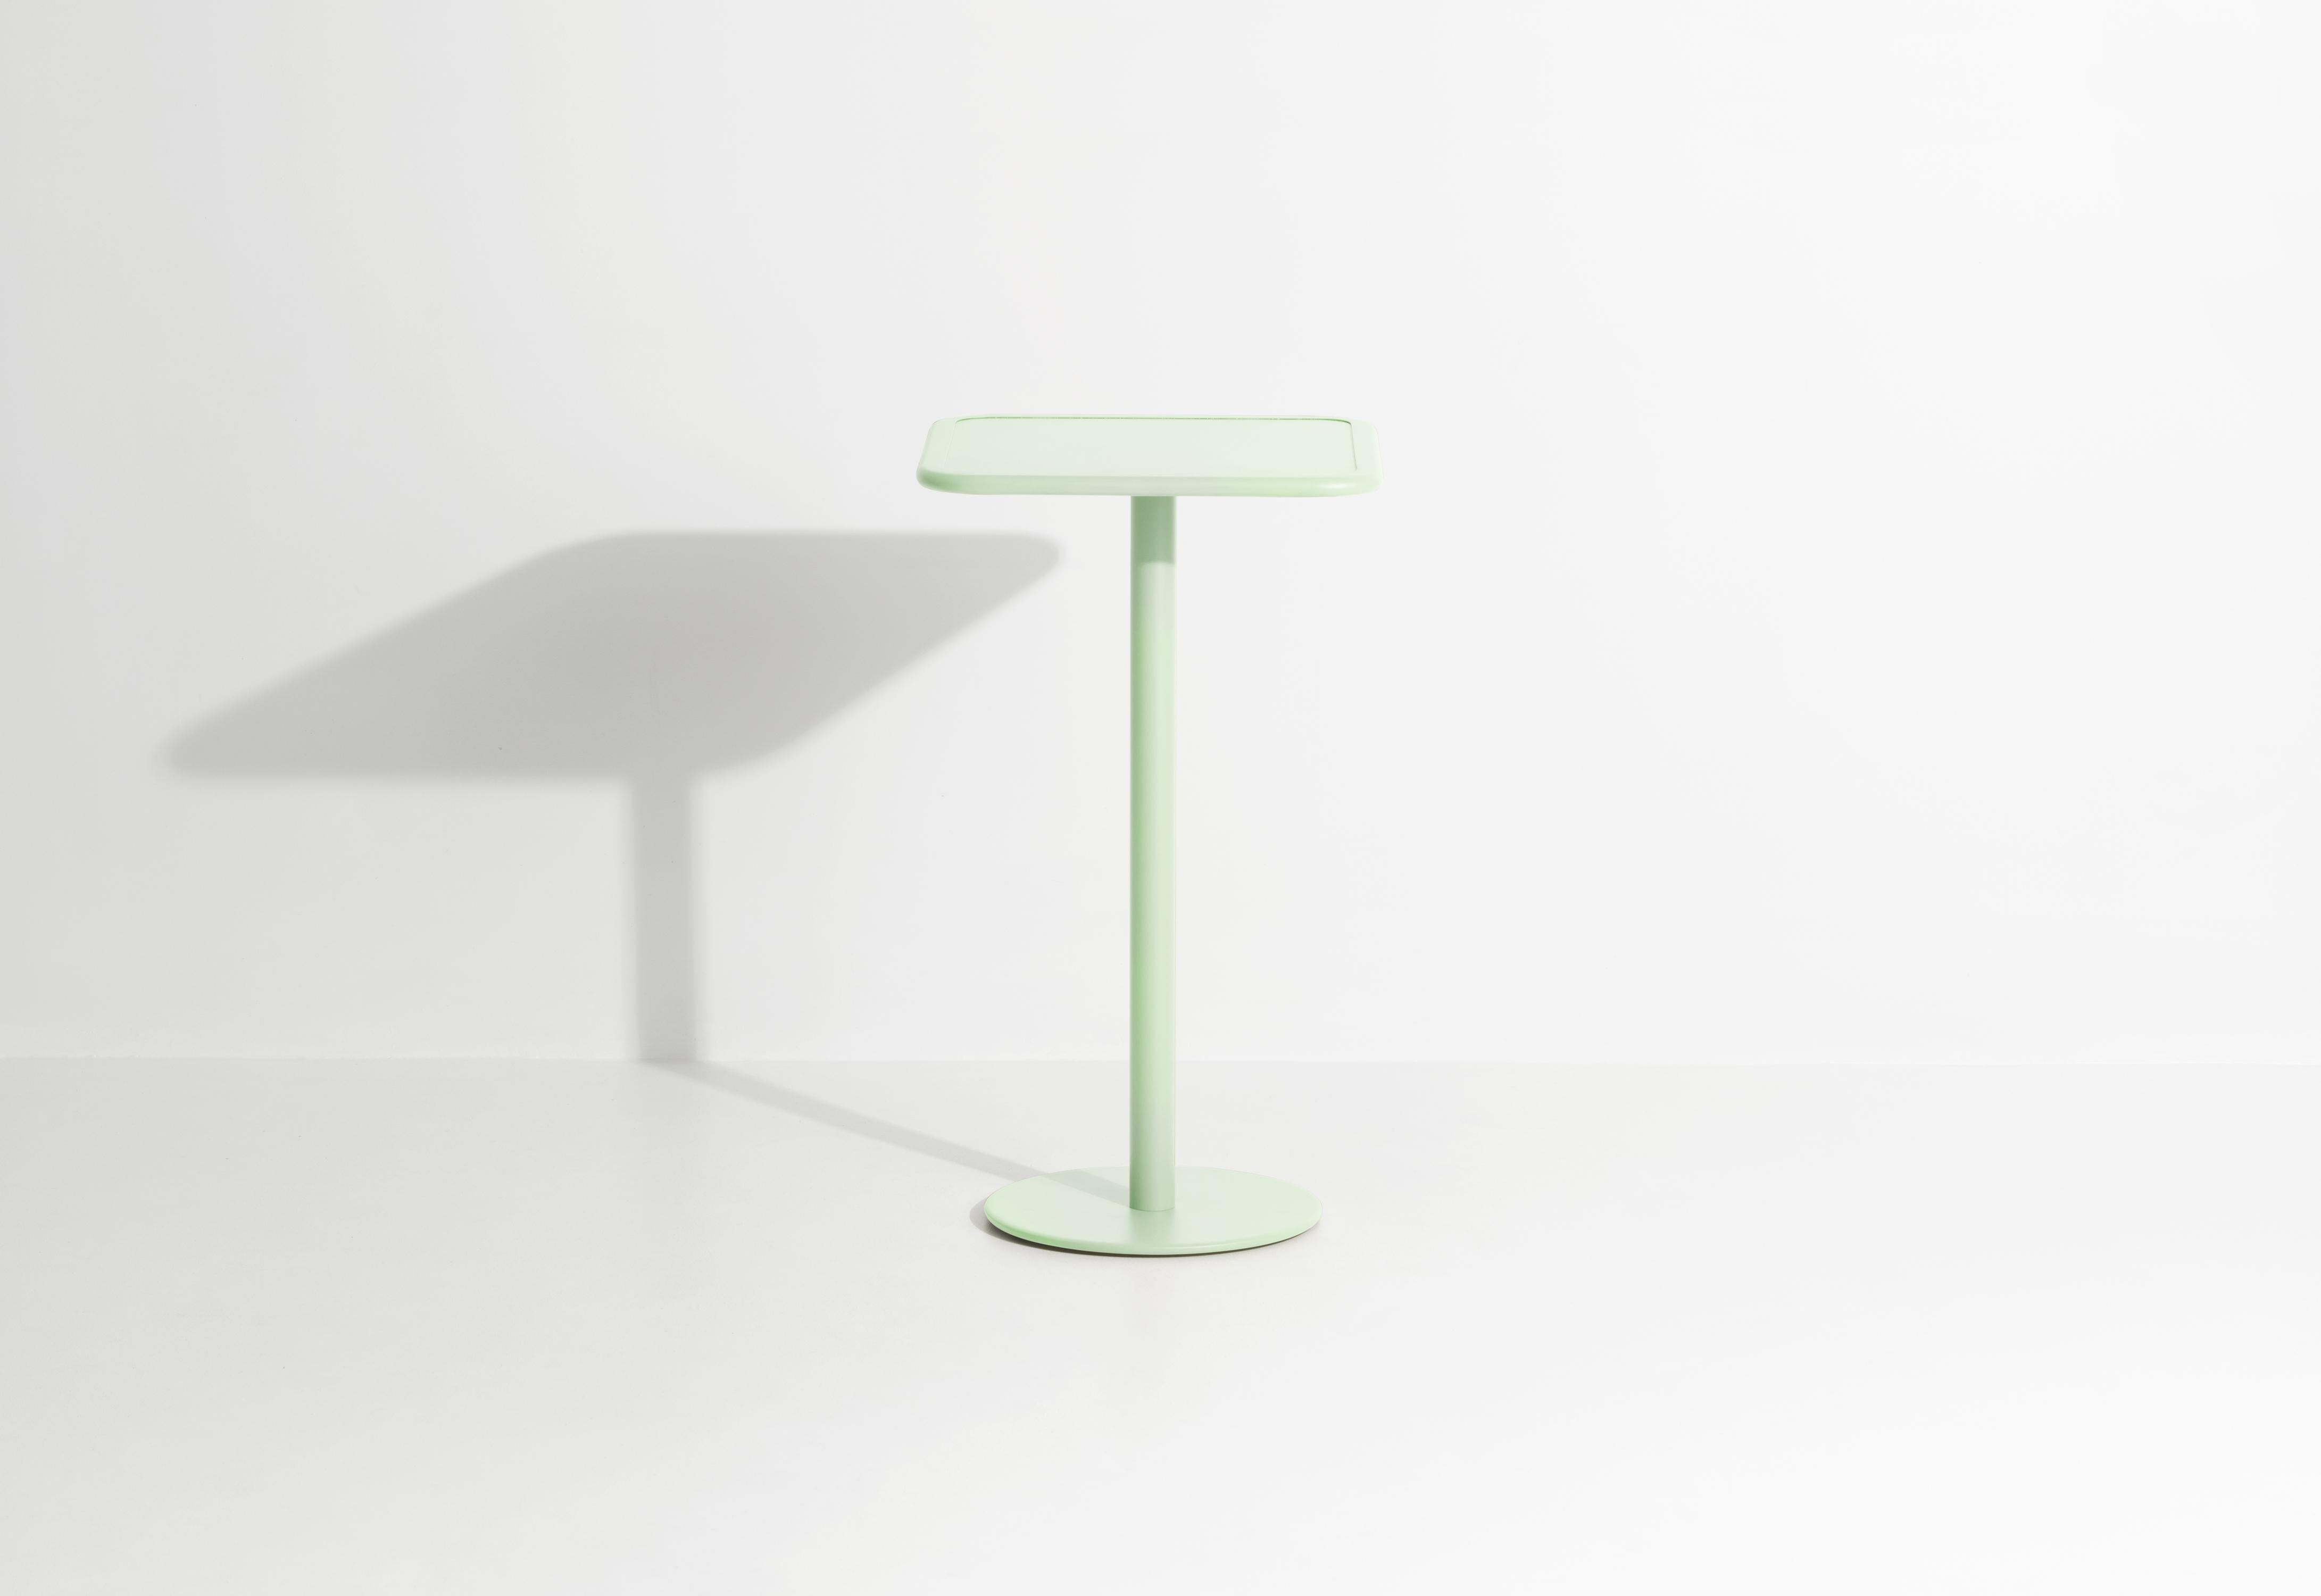 Petite Friture Week-End Square High Table in Pastel Green Aluminium by Studio BrichetZiegler, 2017

The week-end collection is a full range of outdoor furniture, in aluminium grained epoxy paint, matt finish, that includes 18 functions and 8